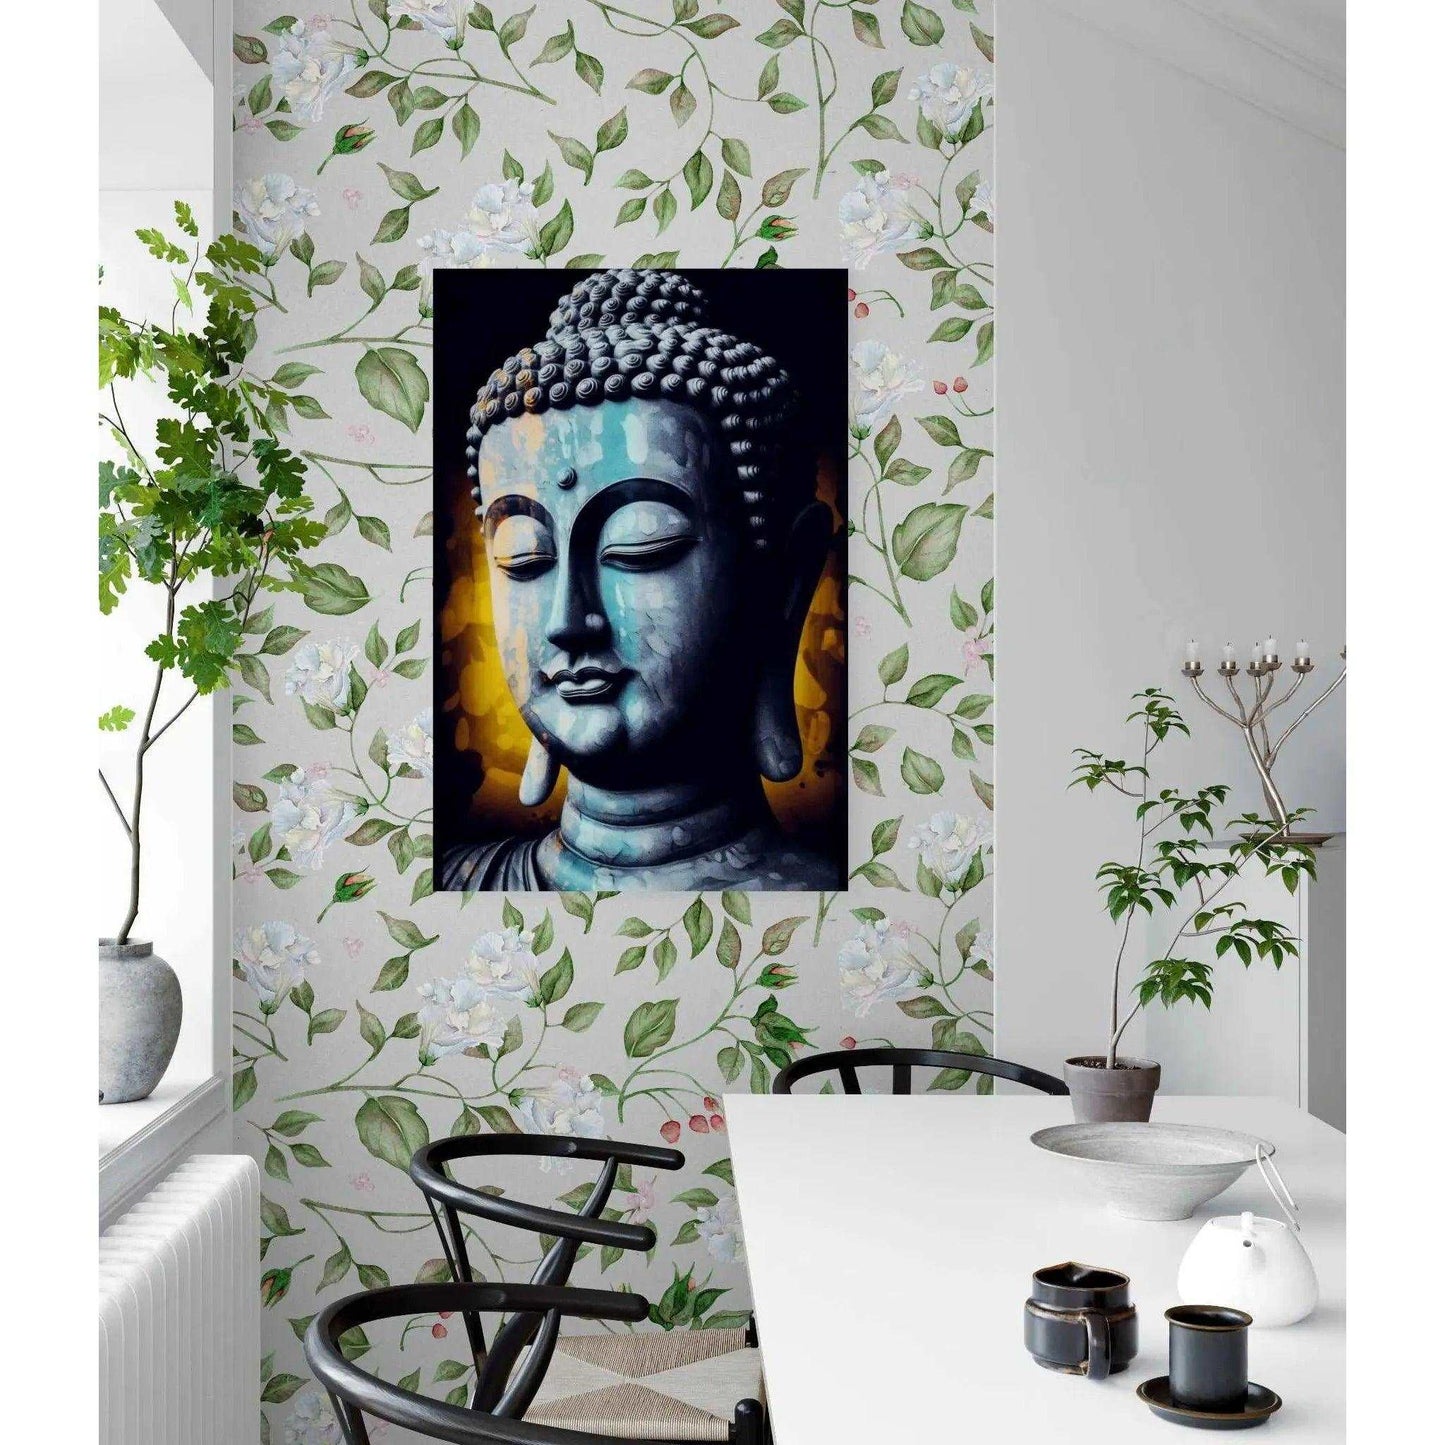 Grayscale Buddha portrait against a yellow bokeh backdrop, centered on a wall with botanical wallpaper, enhancing the calm ambiance of a dining area.